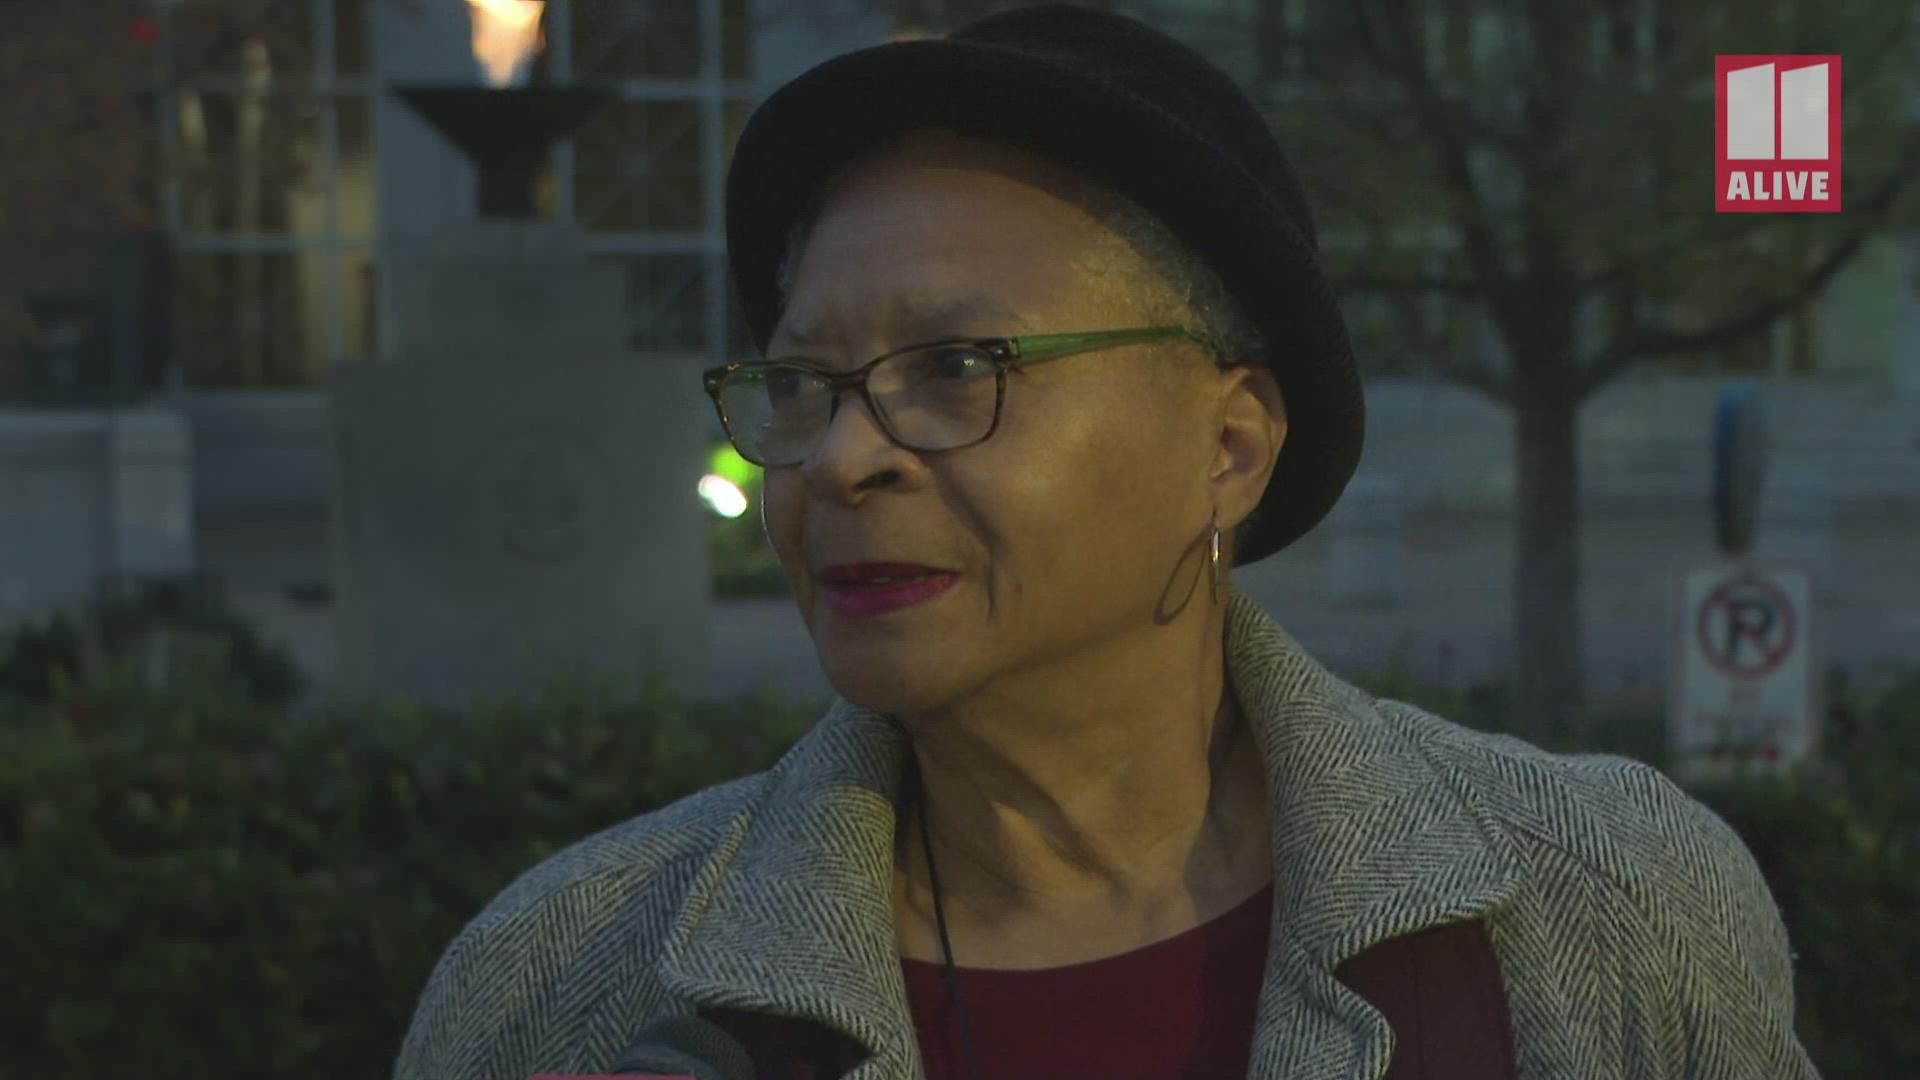 Carolyn Jones told 11Alive voting has always been deeply serious to her because as she was growing up, her own mother wasn't allowed to vote.